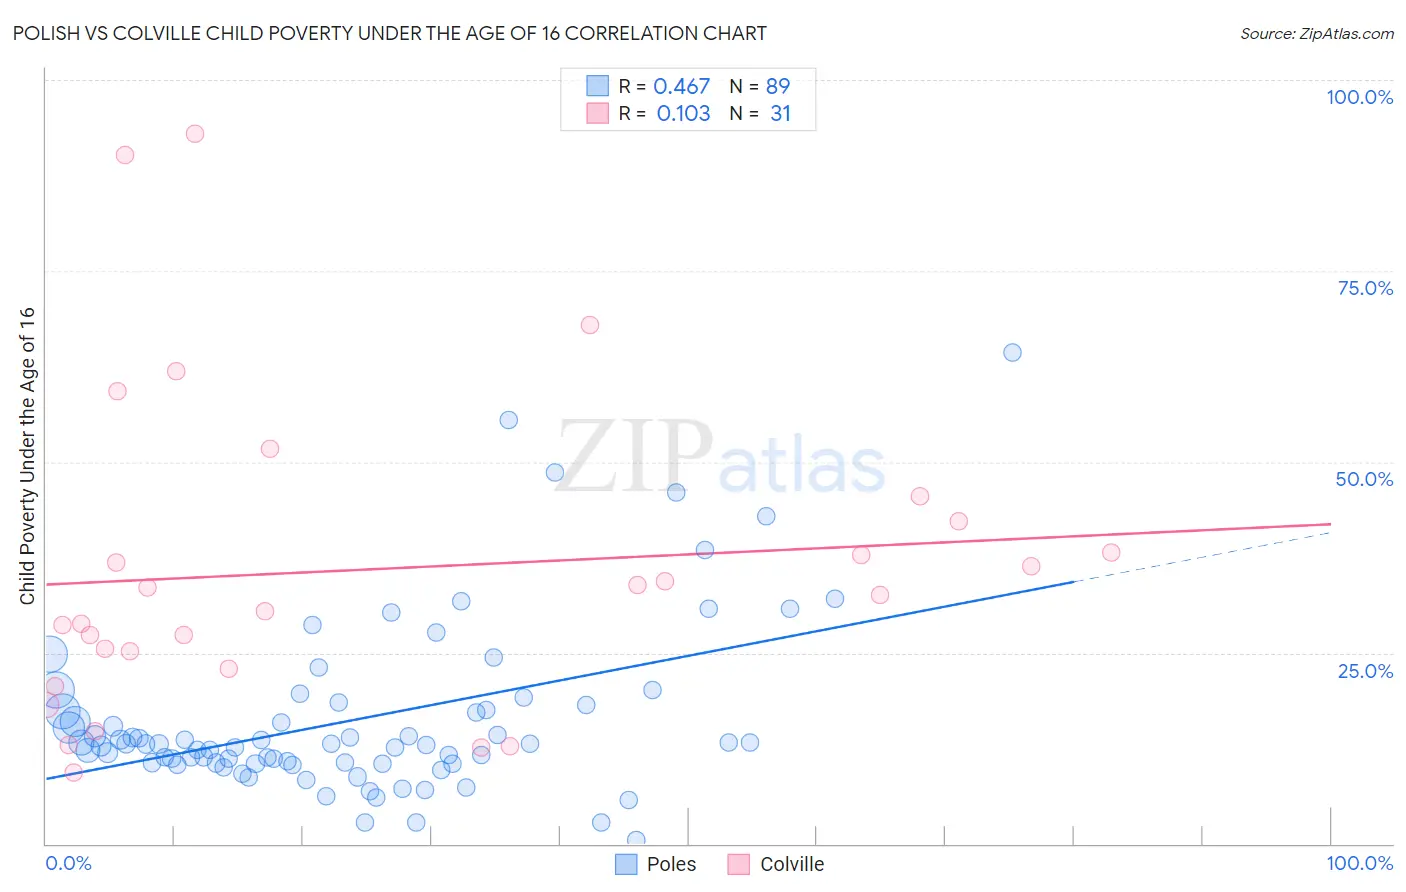 Polish vs Colville Child Poverty Under the Age of 16